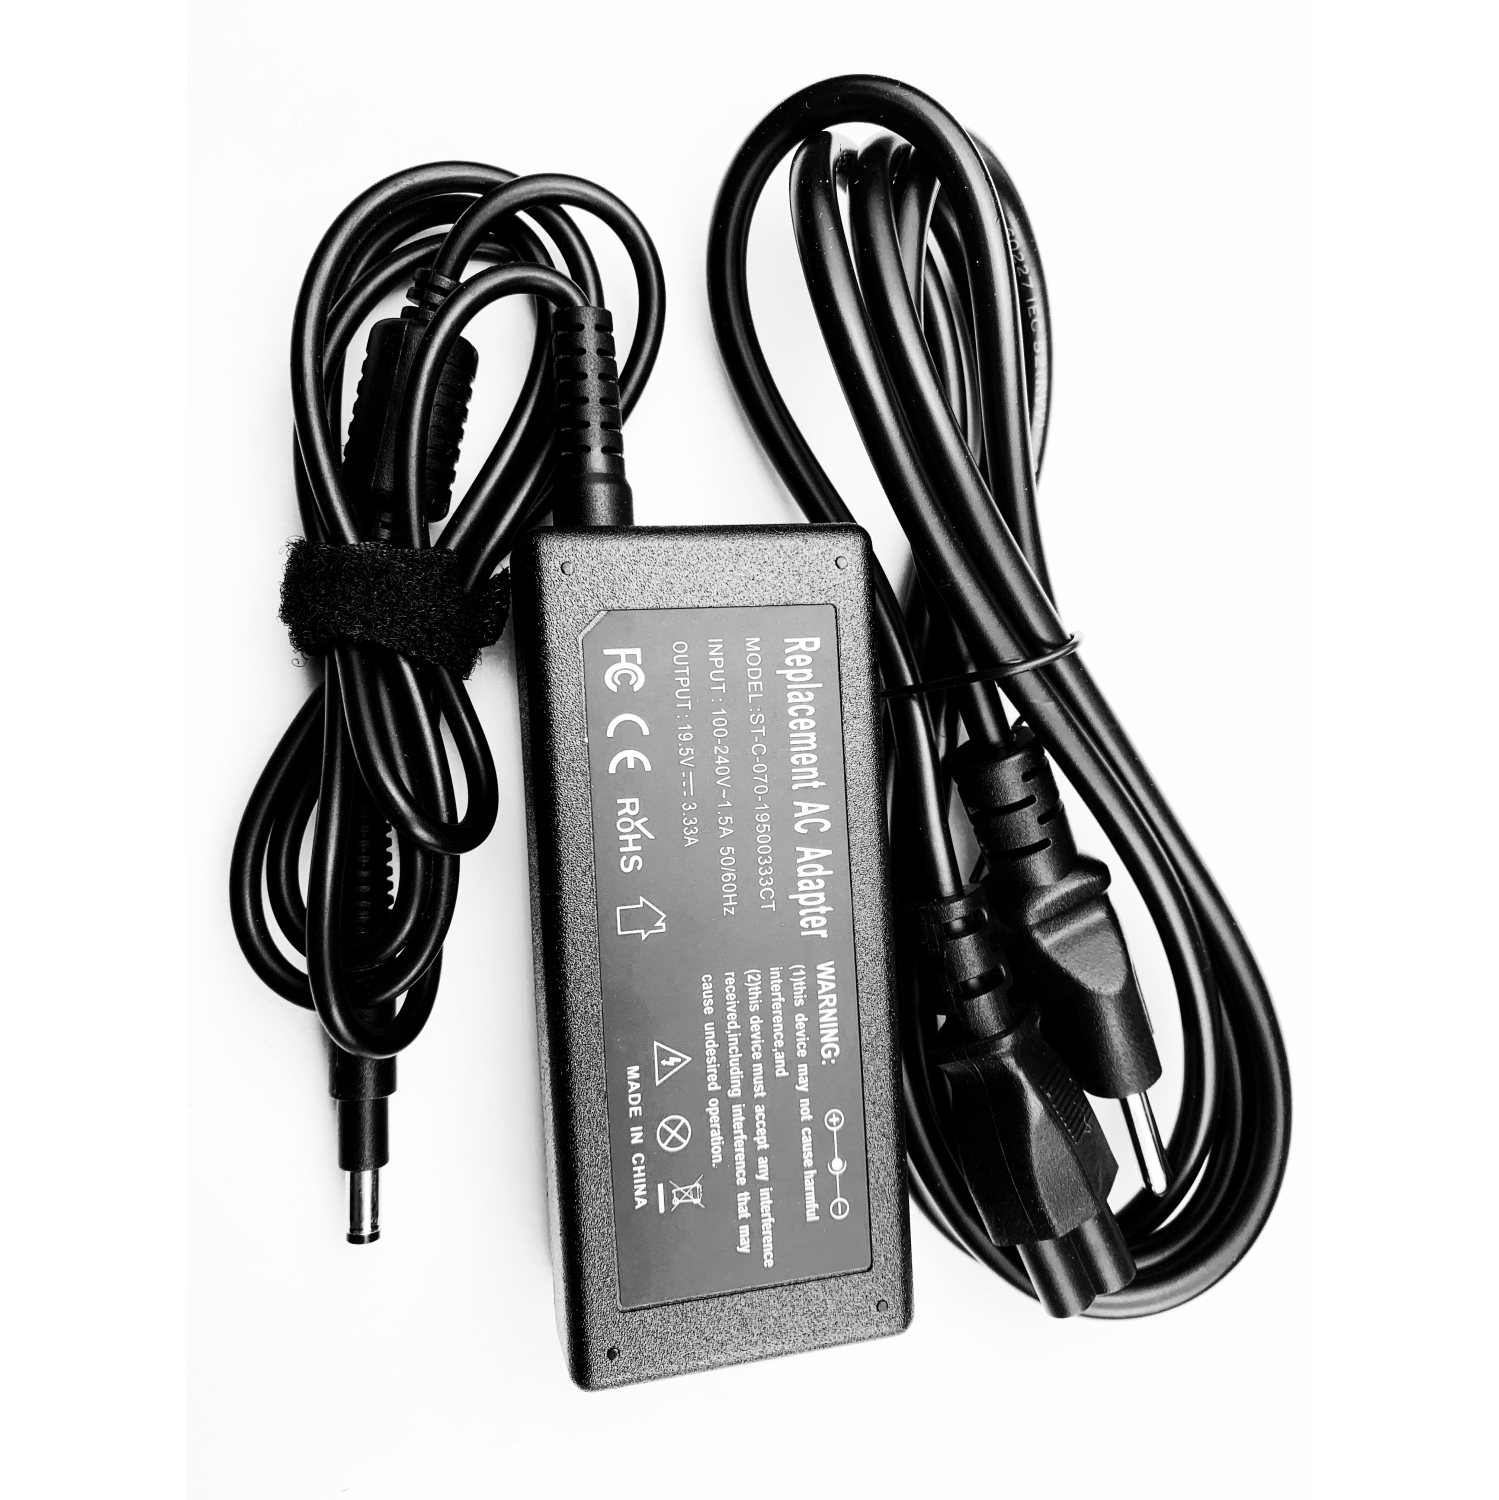 19.5V 65W 4.75mm x 1.7mm new AC adapter power cord charger for HP ENVY 4t-1200 Ultrabook,